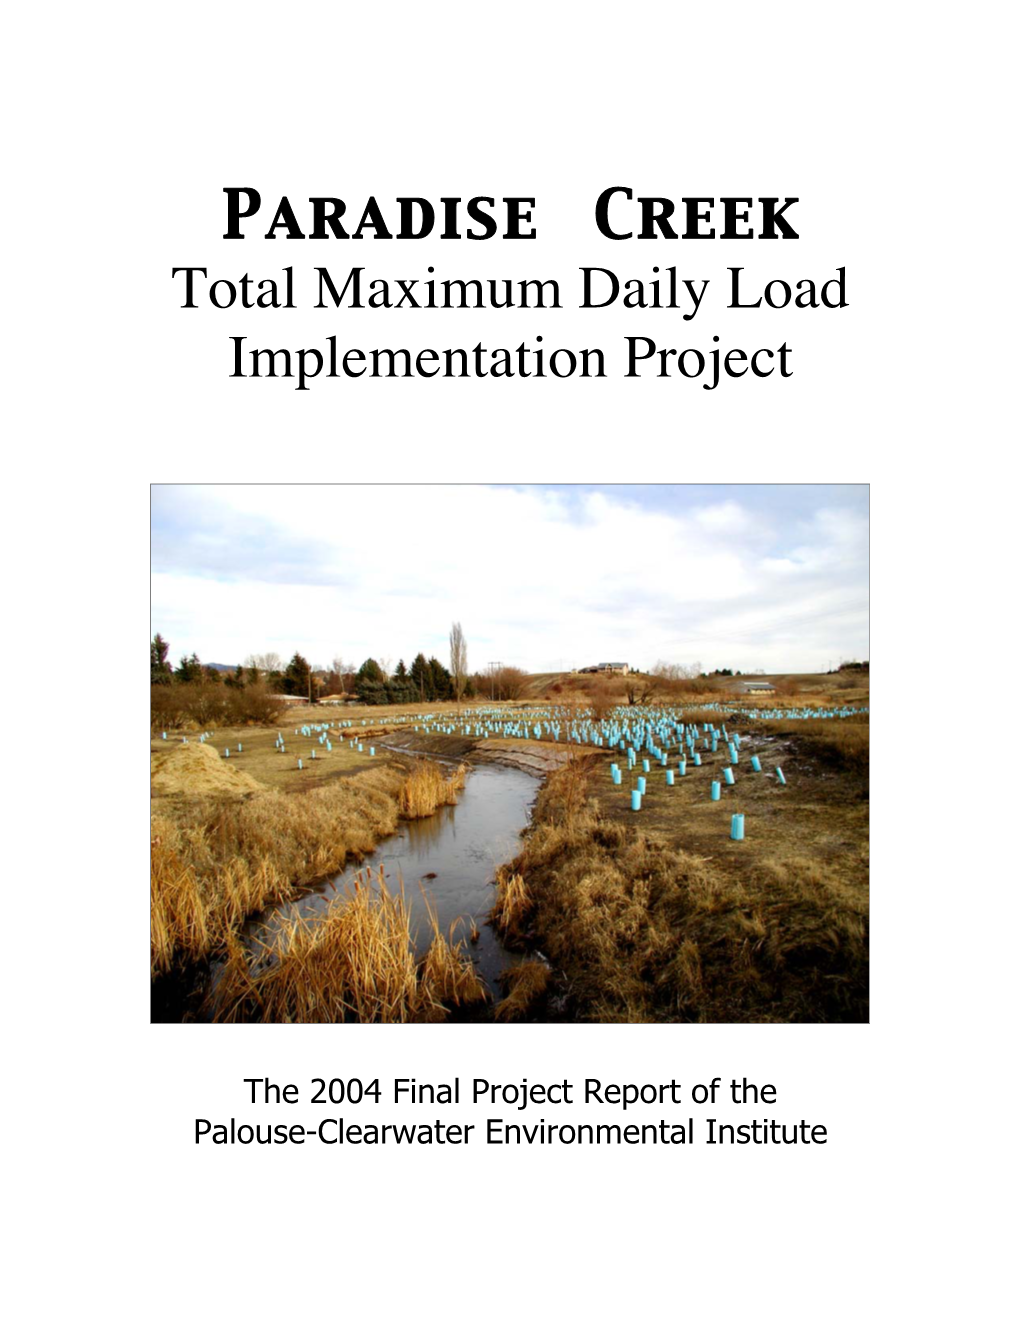 Paradise Creek Total Maximum Daily Load Implementation Project